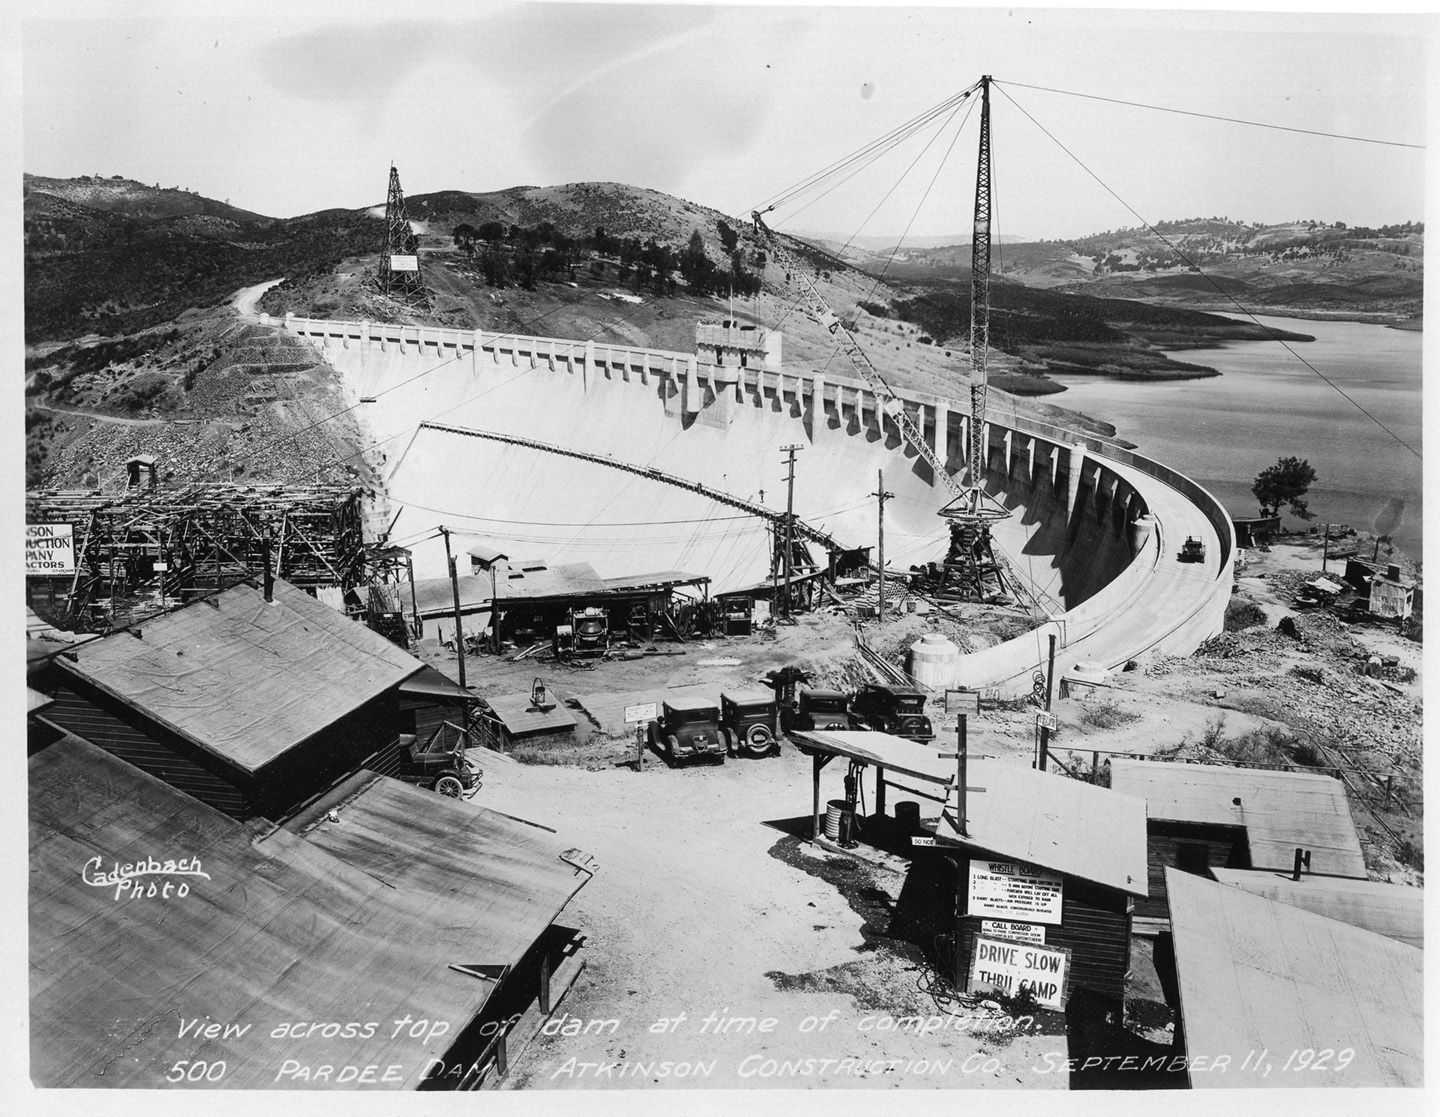 View across top of dam at time of completion. (September 1929)	